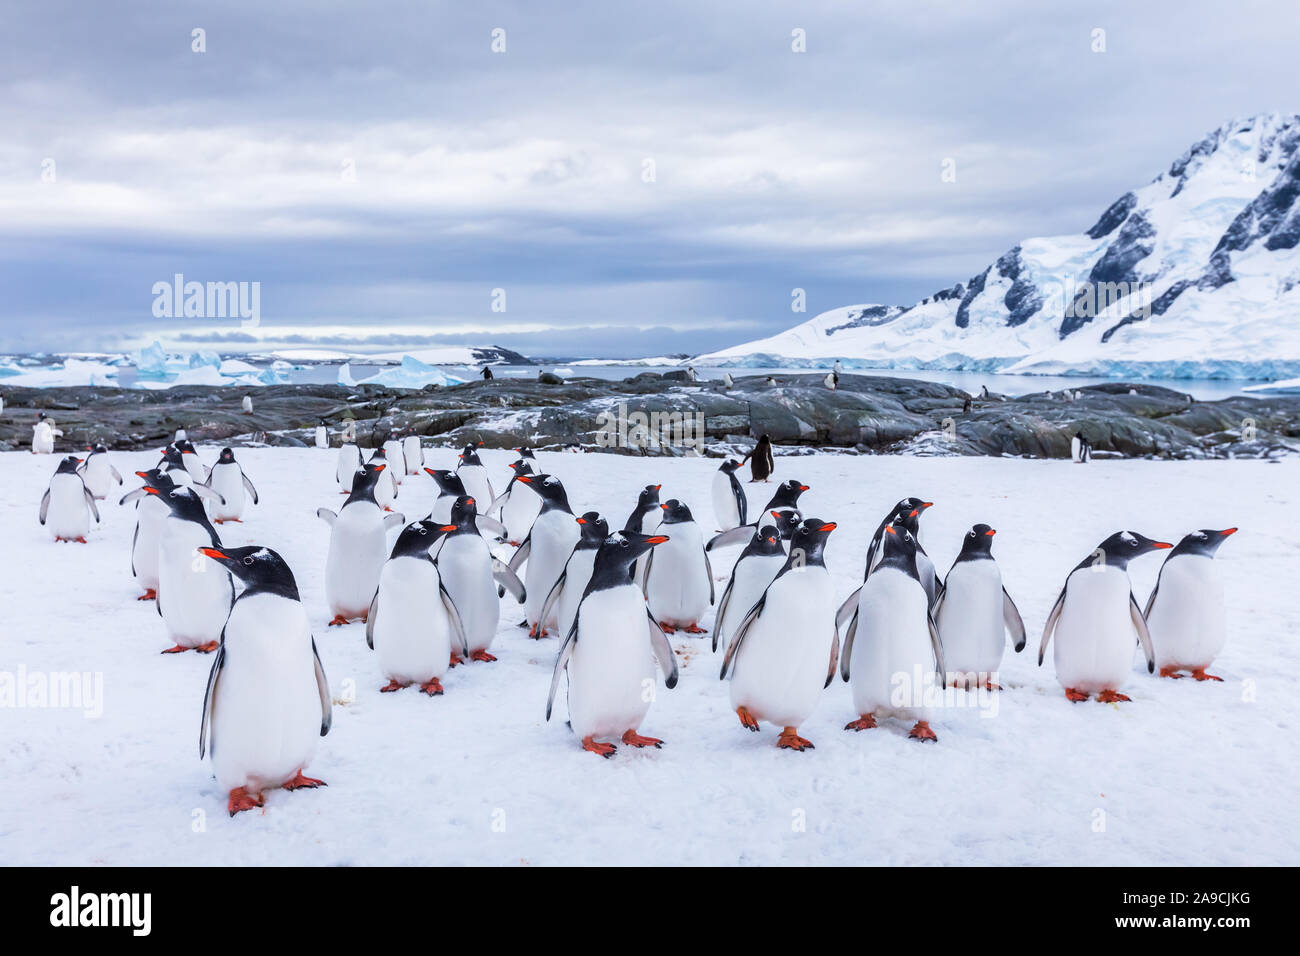 Group of curious Gentoo Penguin staring at camera in Antarctica, creche or waddle of juvenile seabird on glacier, colony in Antarctic Peninsula, snow Stock Photo